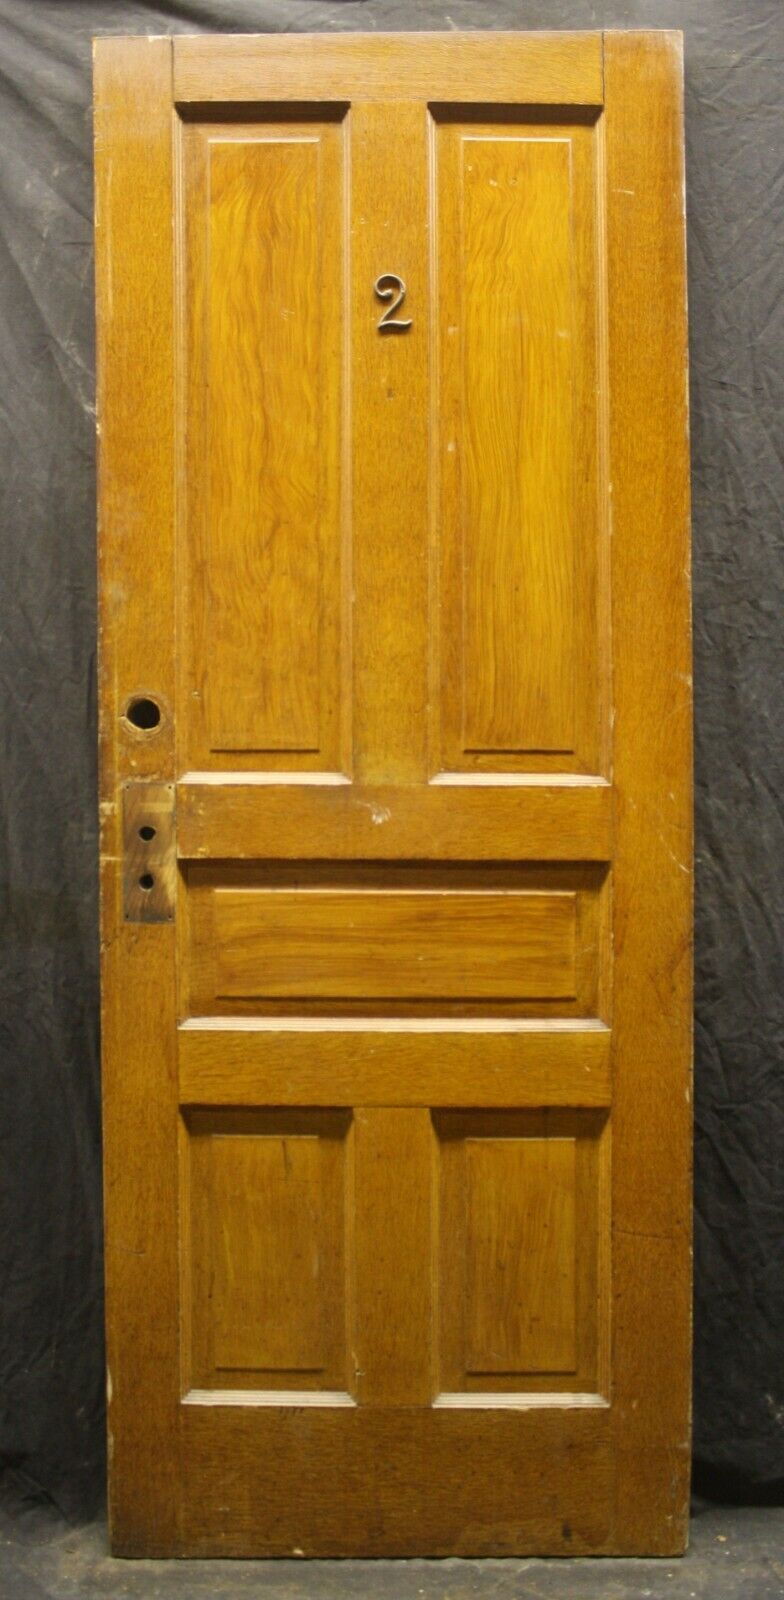 3 available 30"x79" Antique Vintage Old Reclaimed Salvaged SOLID Wood Wooden Interior Doors 5 Panel